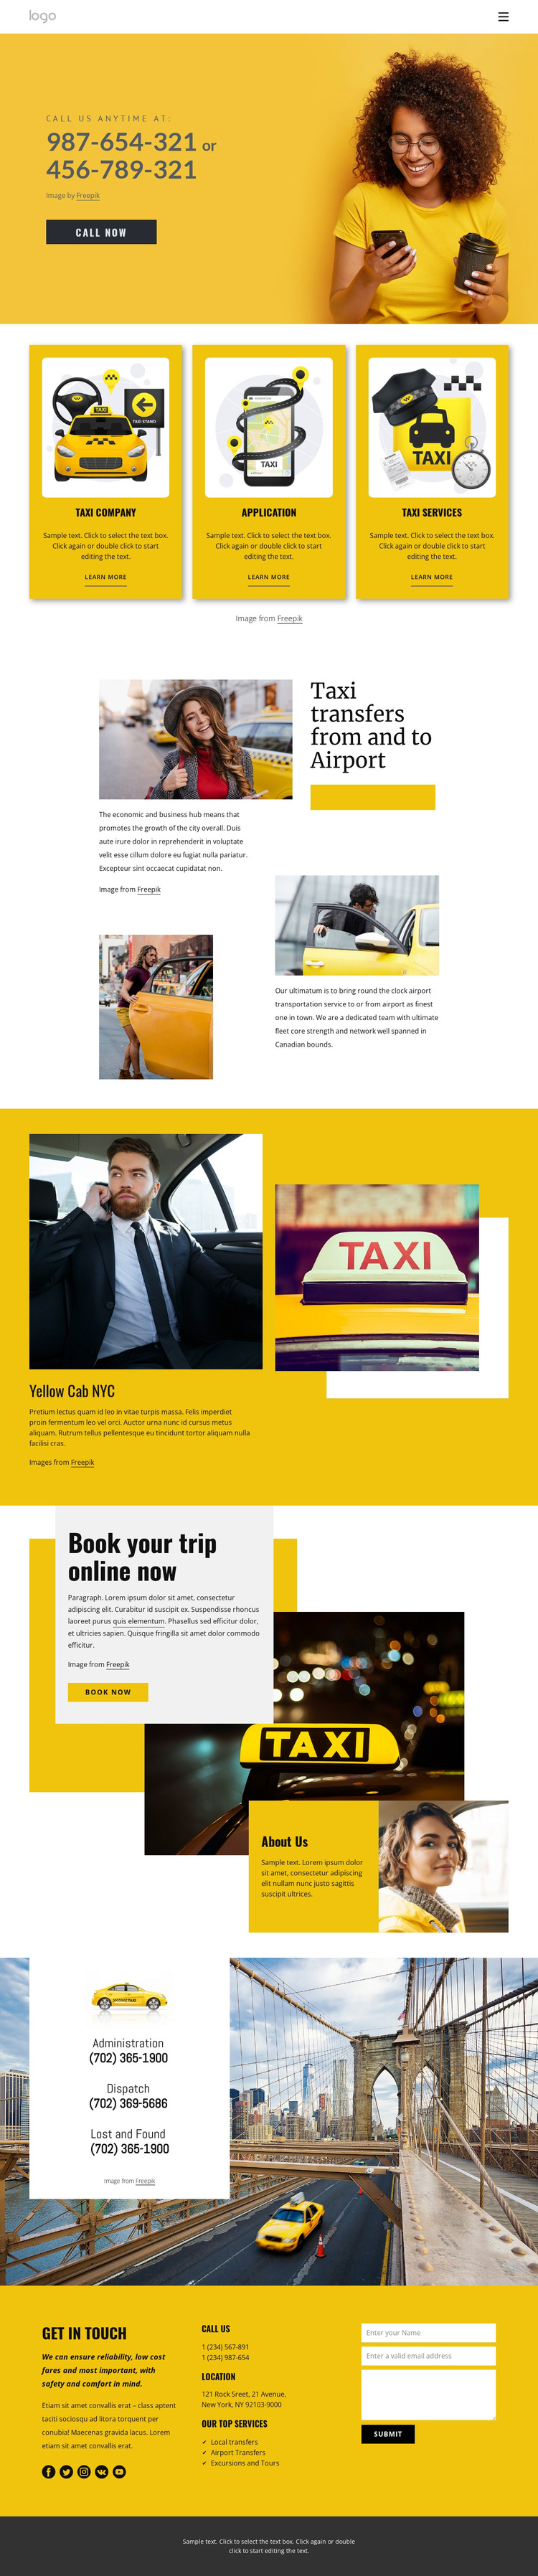 Quality taxi service Joomla Page Builder